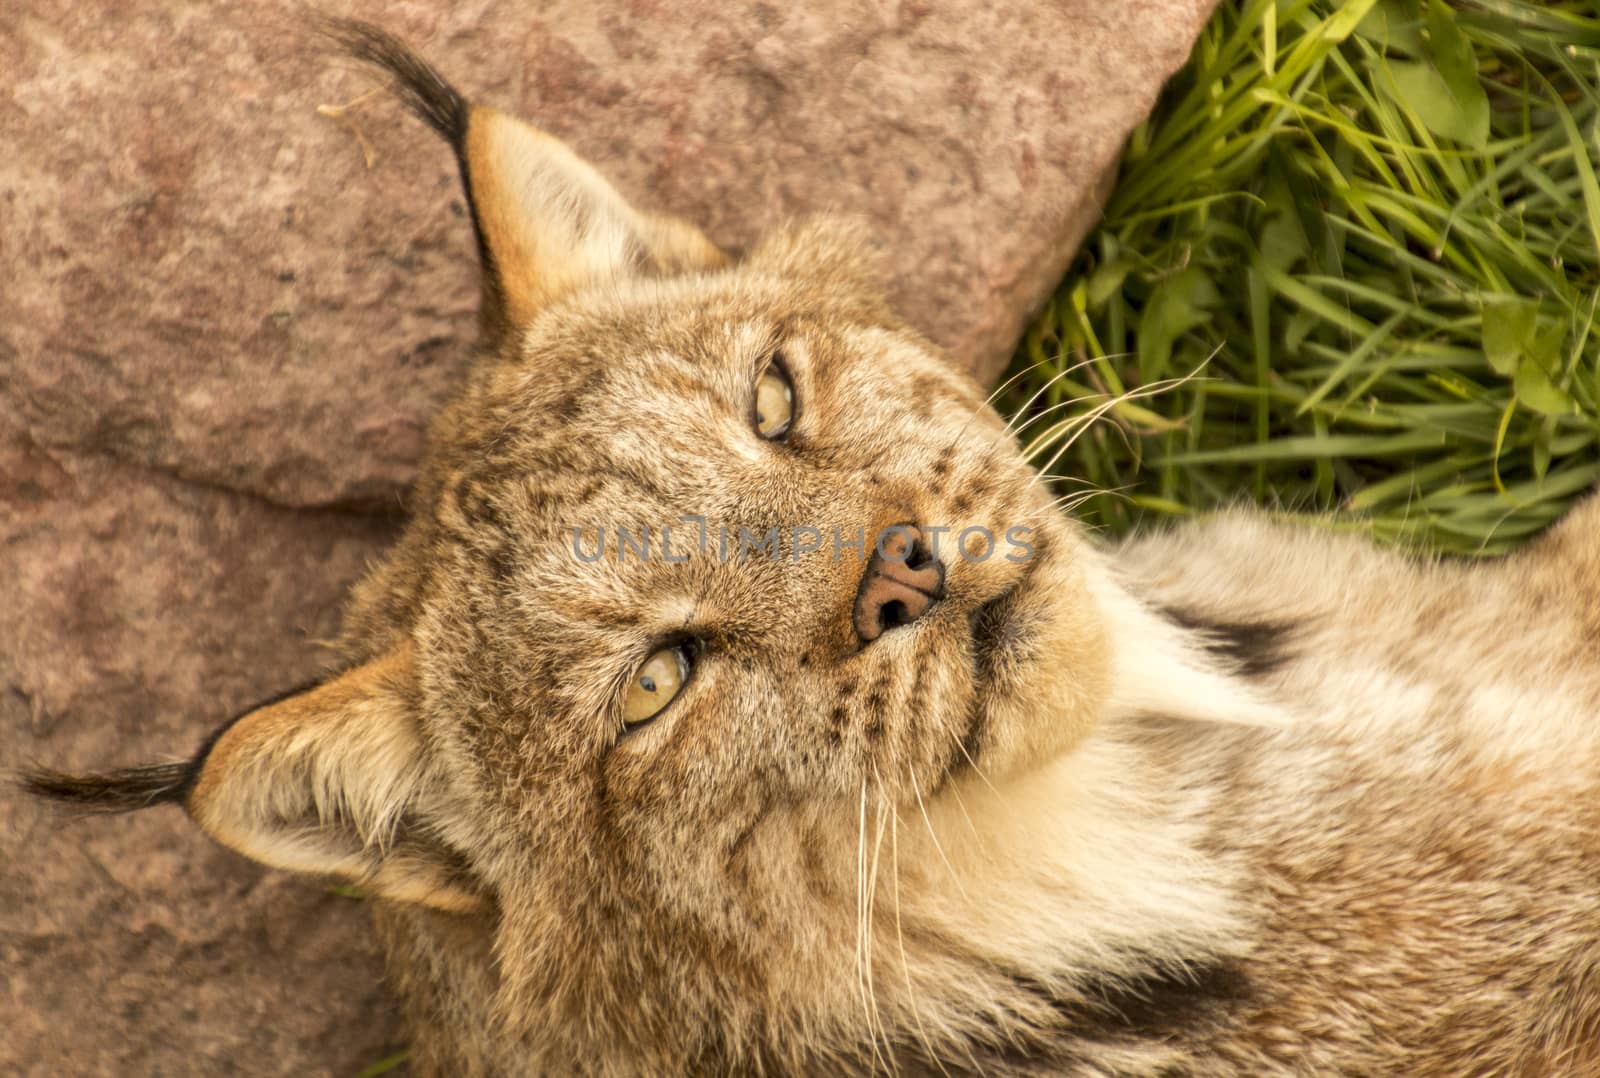 A lynx in captivity relaxing on the grass.